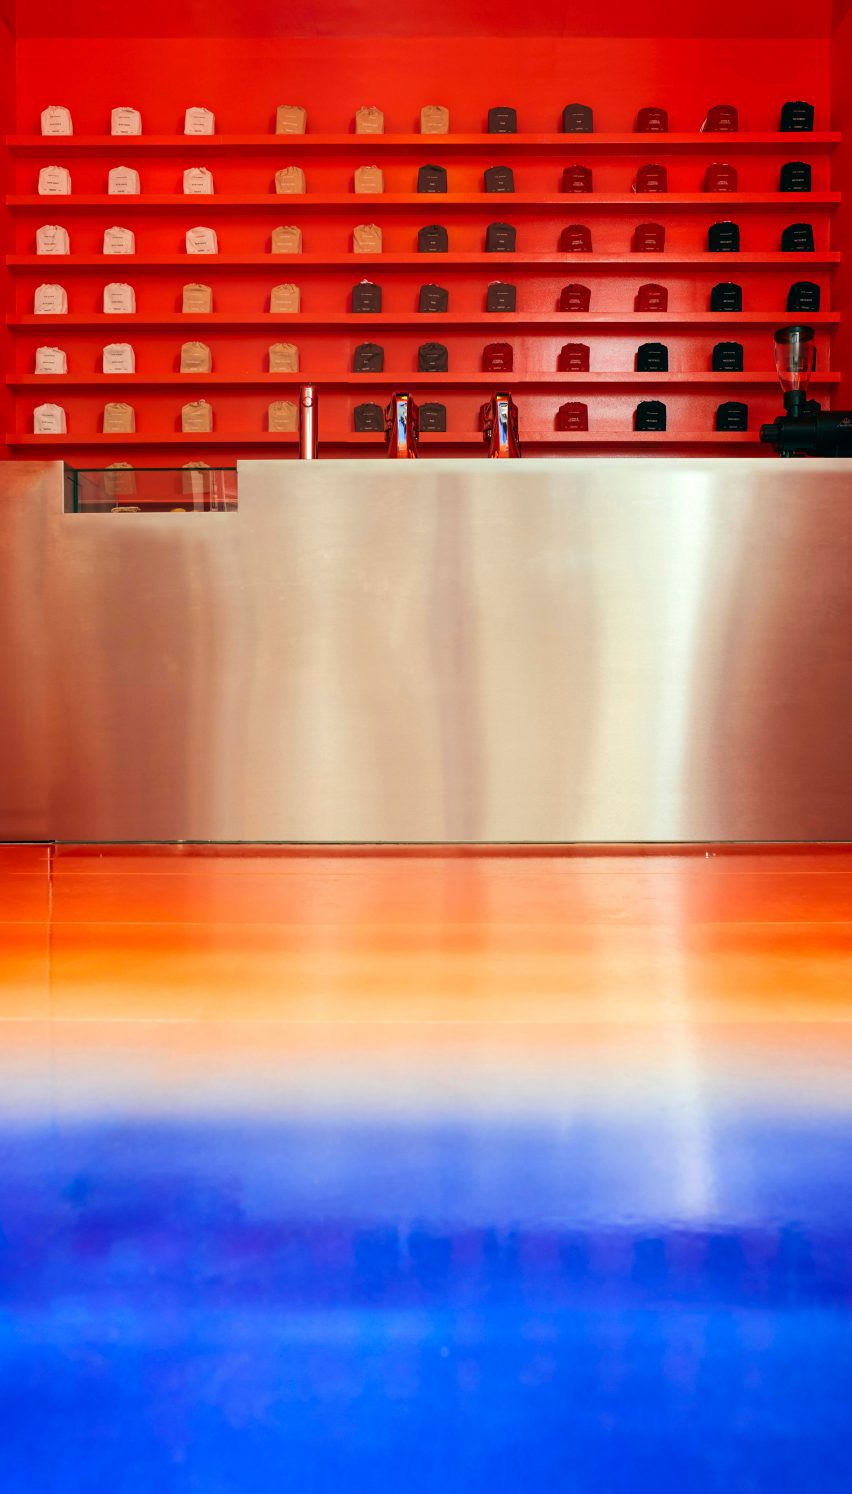 Stainless steel counter with orange lacquered shelving behind it